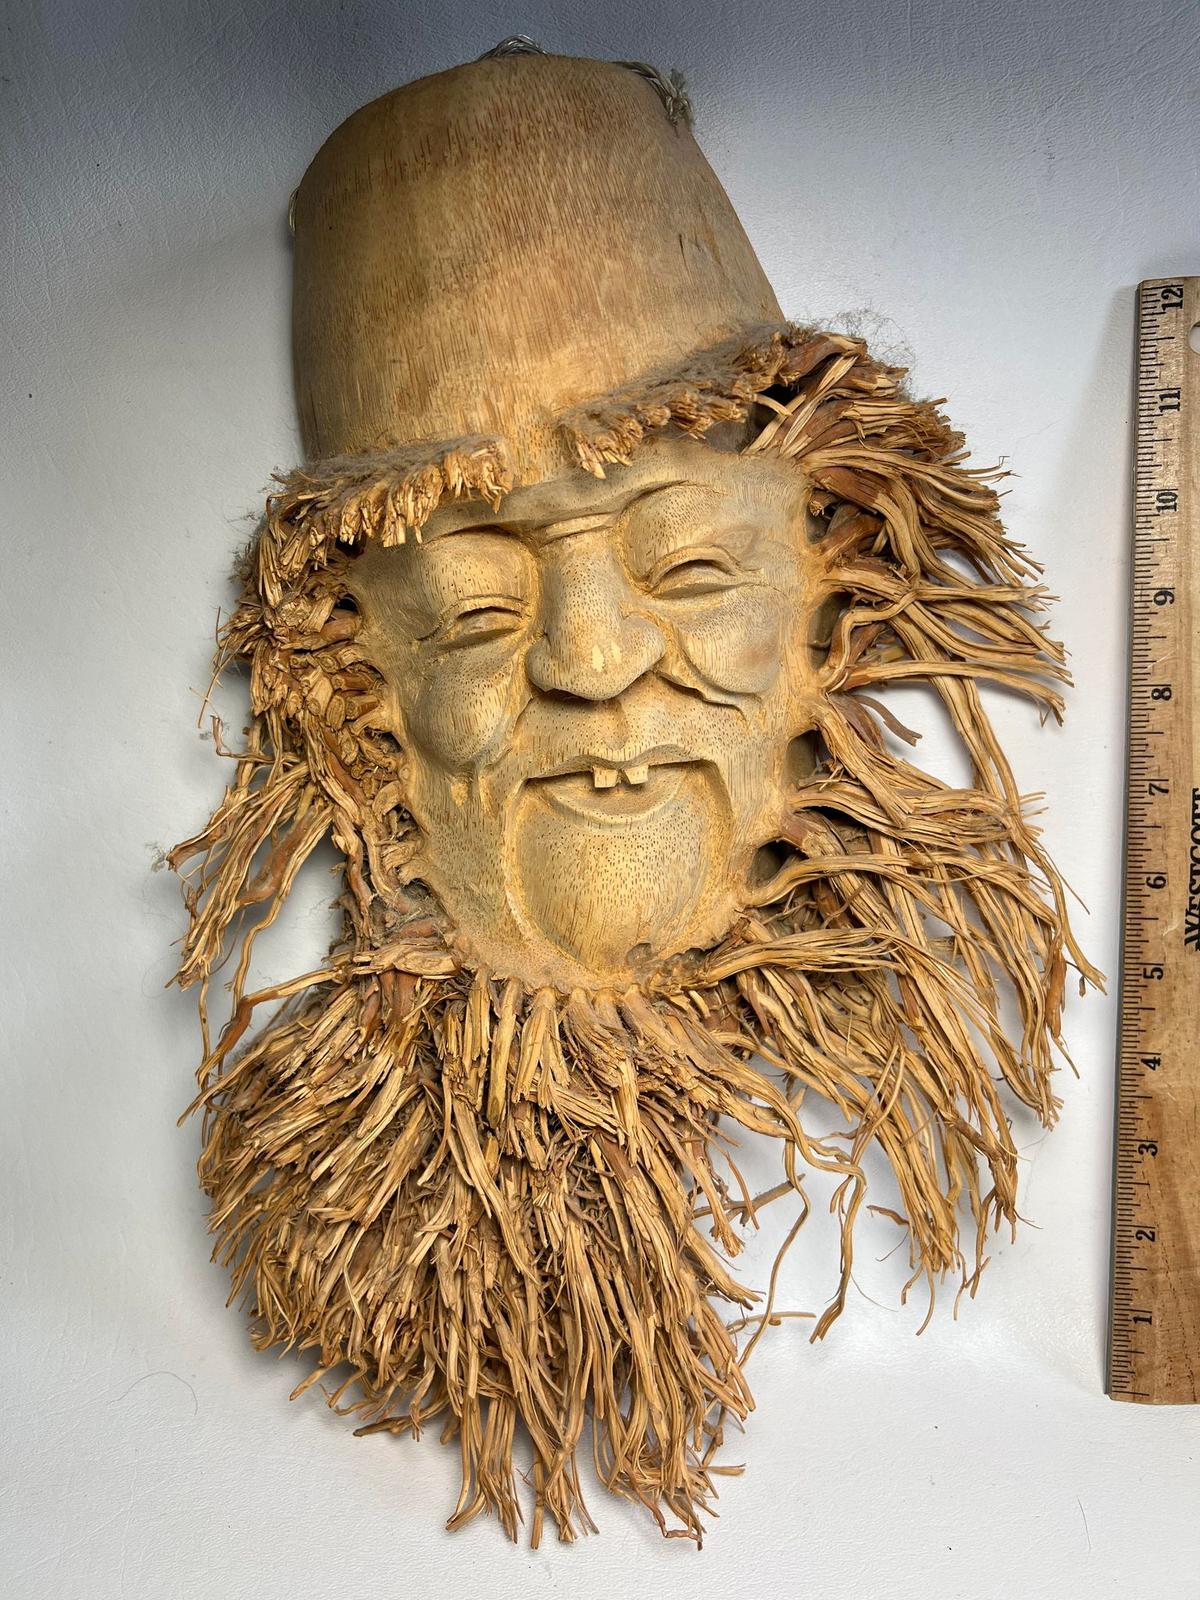 Very Unique & Cool Hand Carved Man with Beard Wall Art